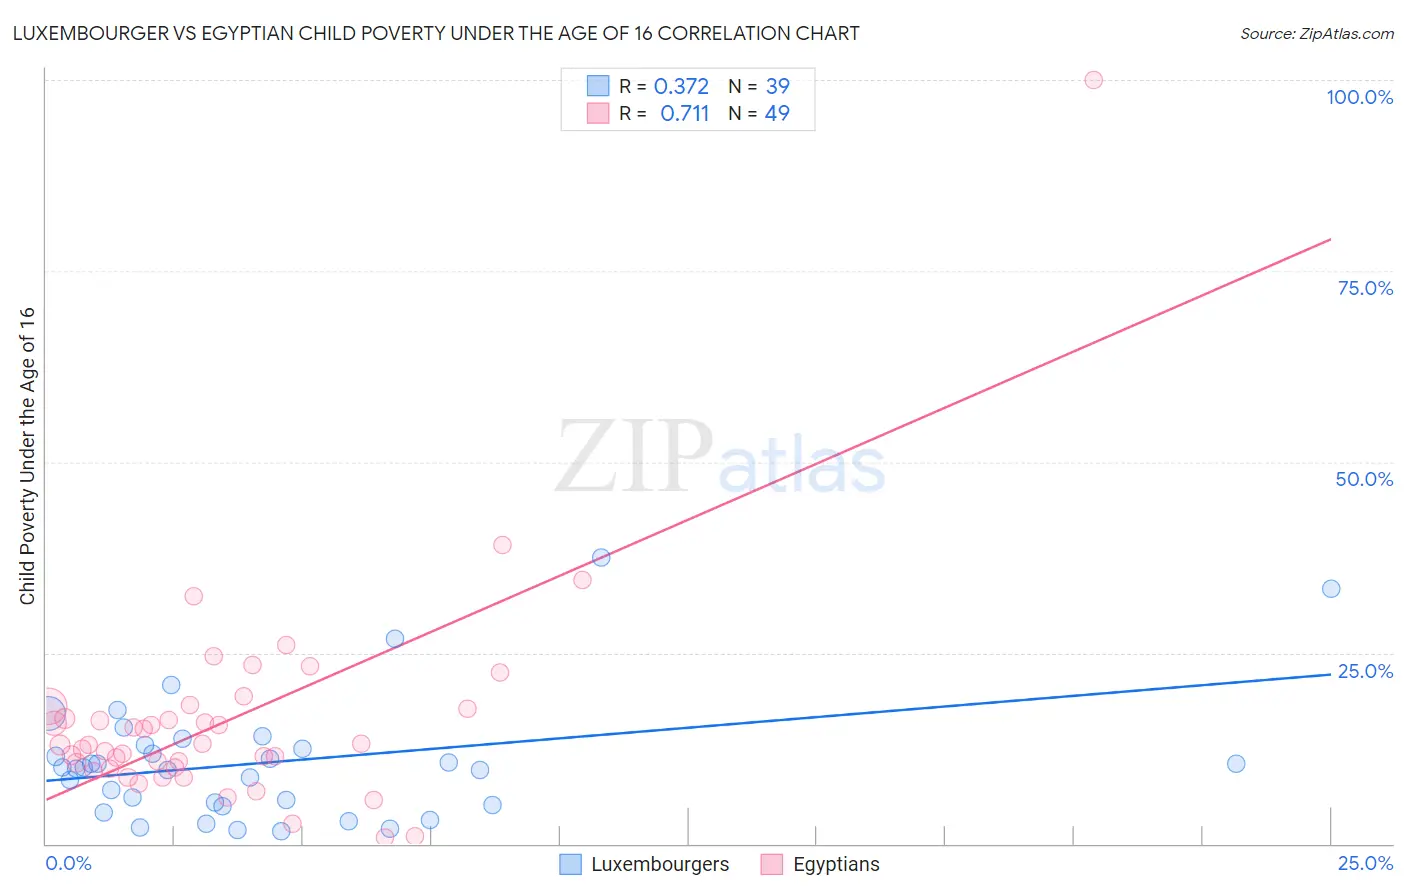 Luxembourger vs Egyptian Child Poverty Under the Age of 16